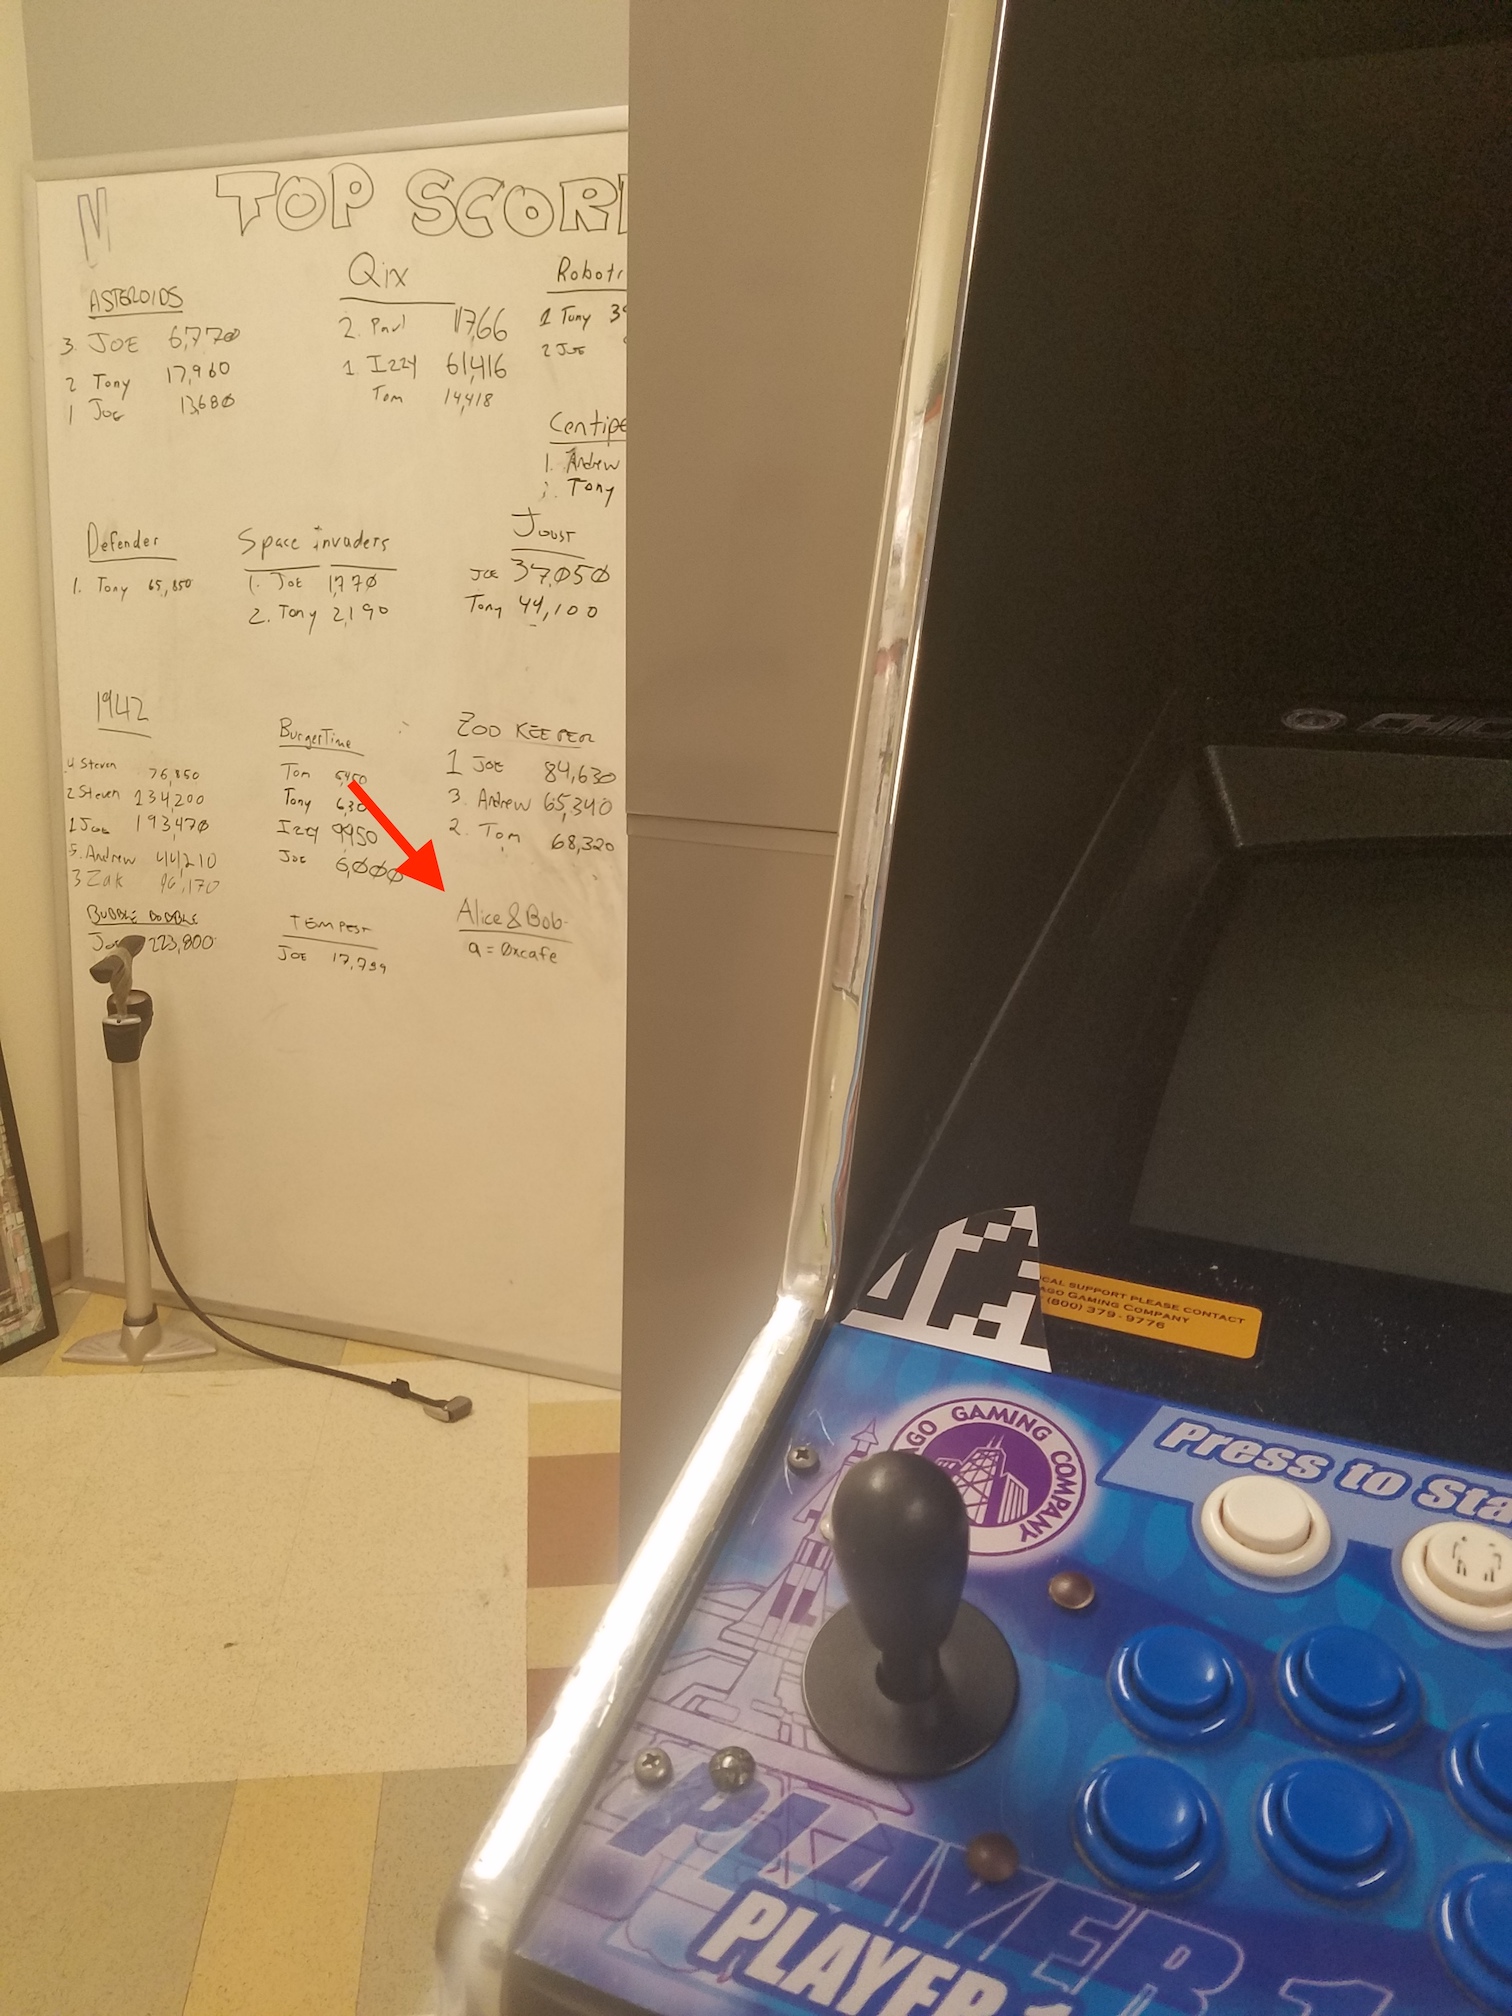 Partial view of an arcade machine
        with a whiteboard of 'Top Scores' in the background. One game listed is 'Alice & Bob',
        with top score 'a=0xcafe'